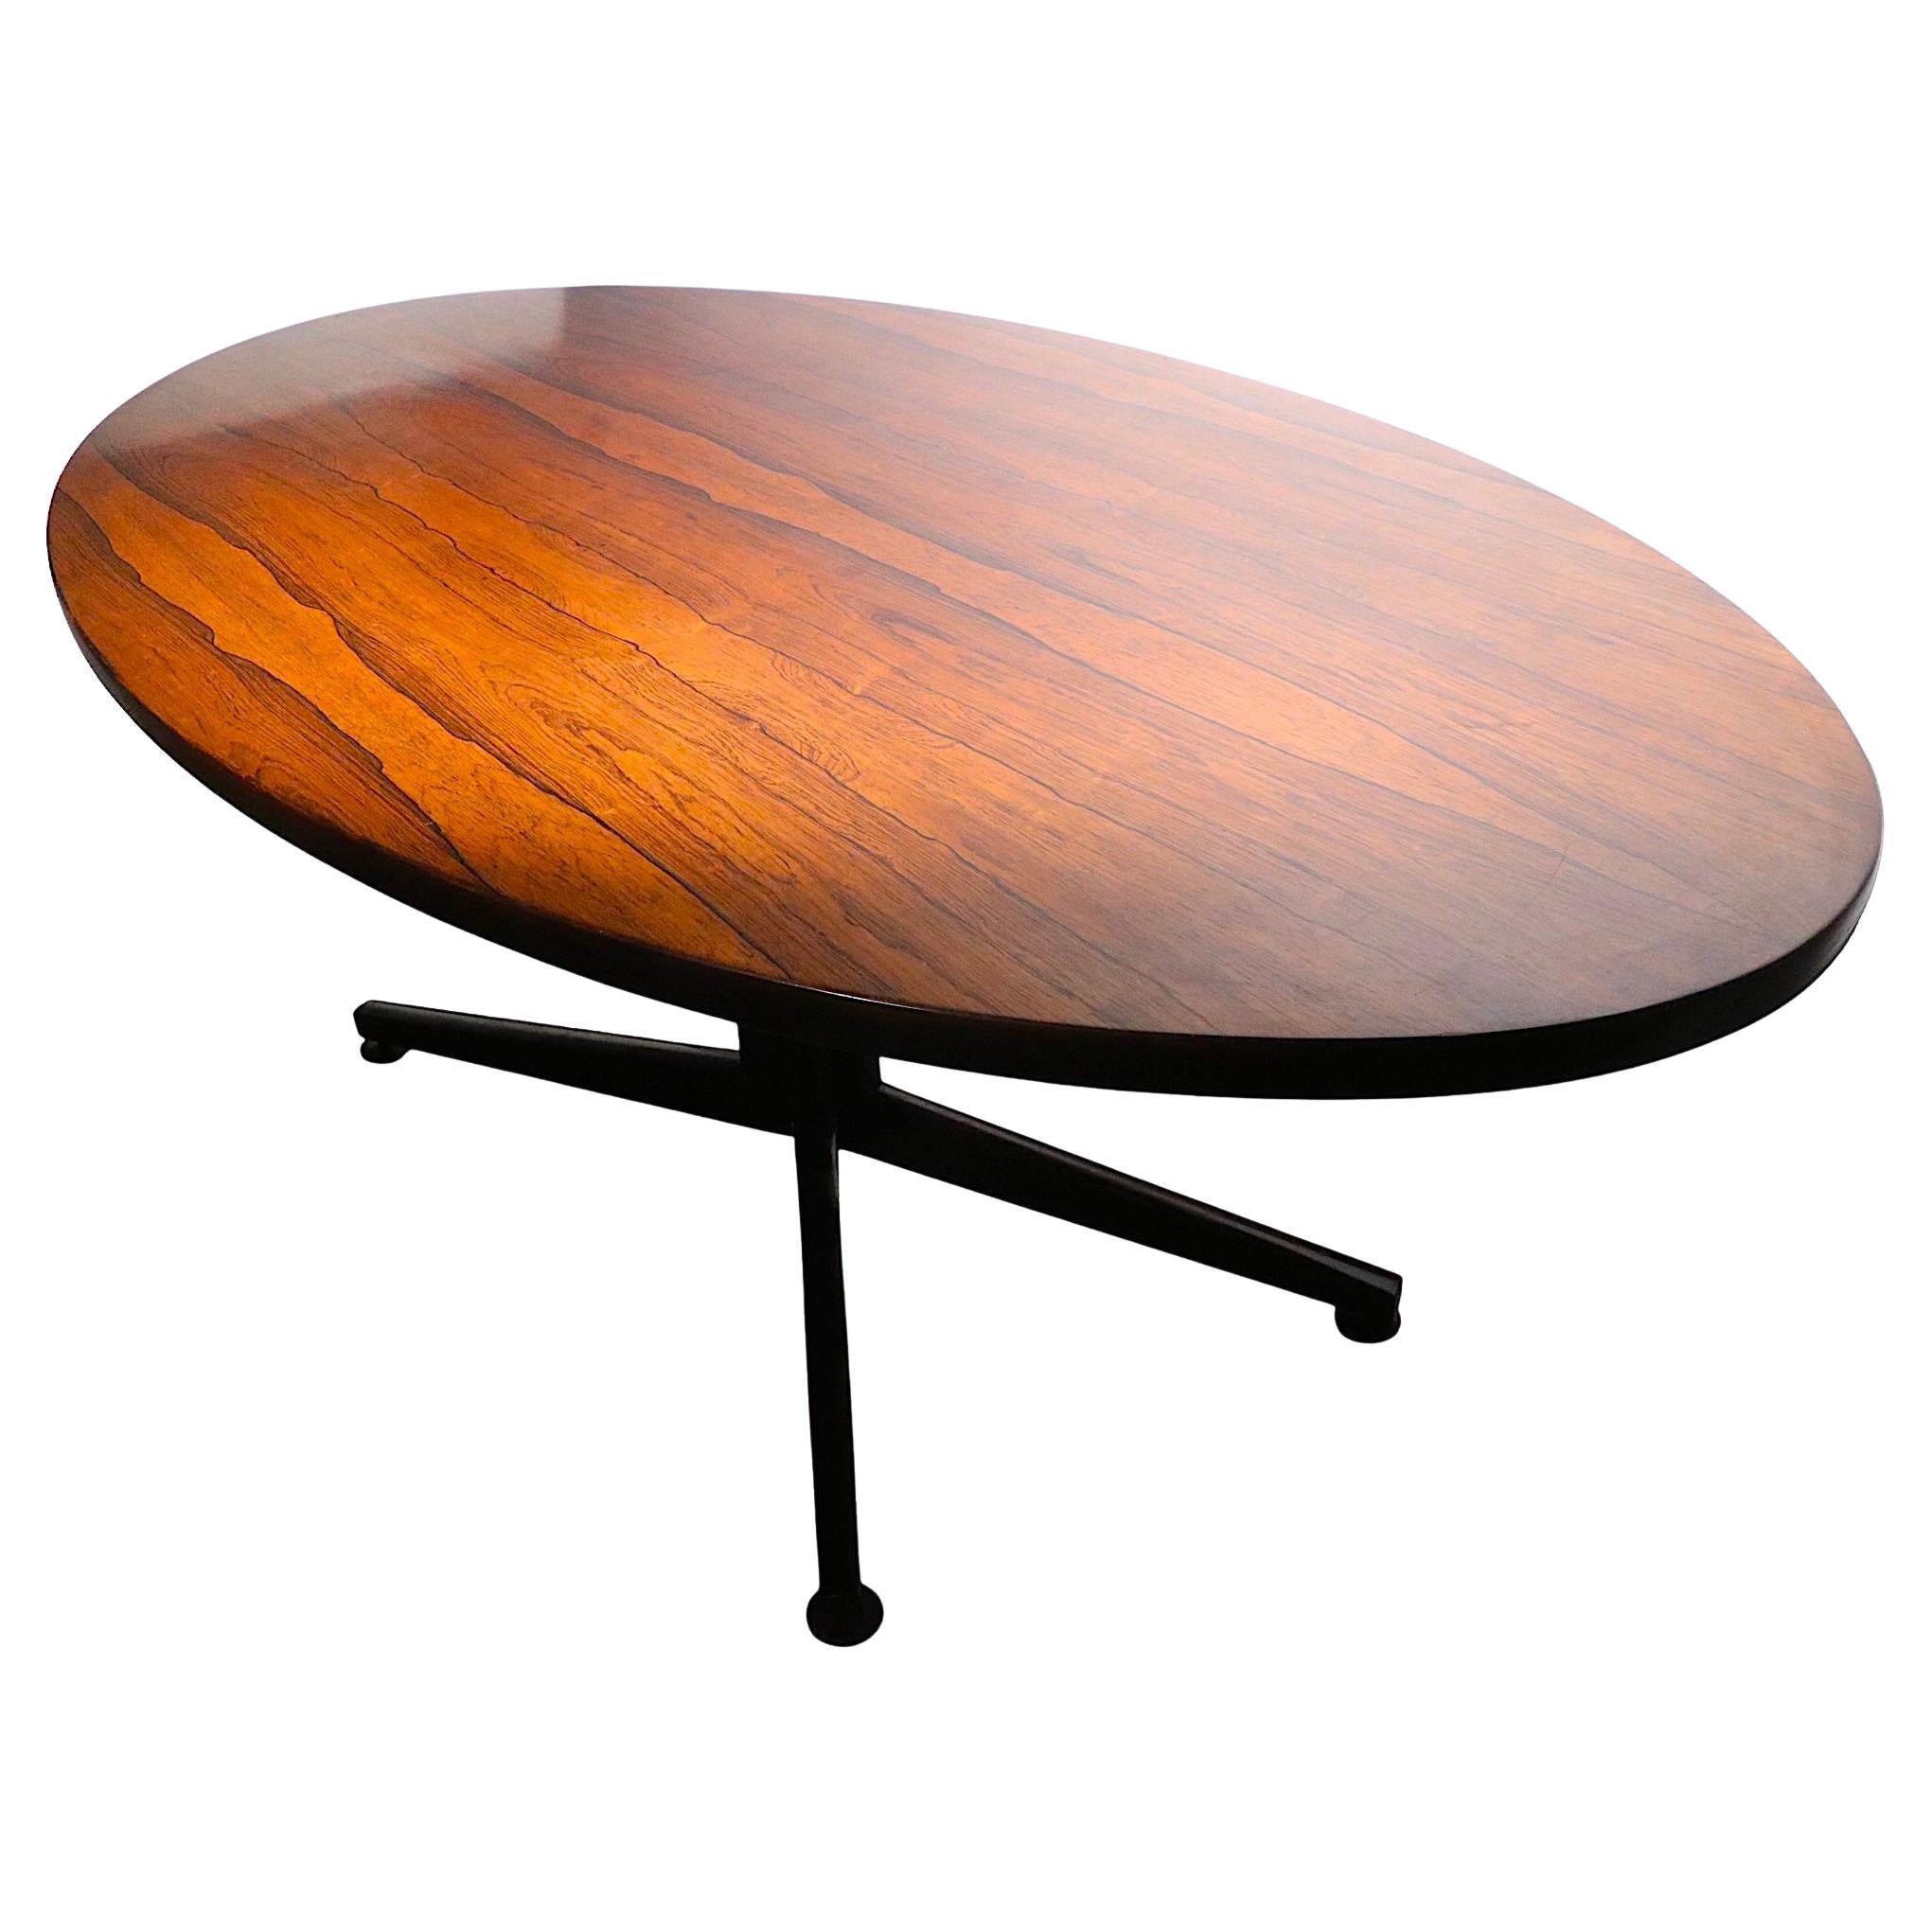 Dunbar Wormley Dining Table in Rosewood Model 936 C 1950/1960's